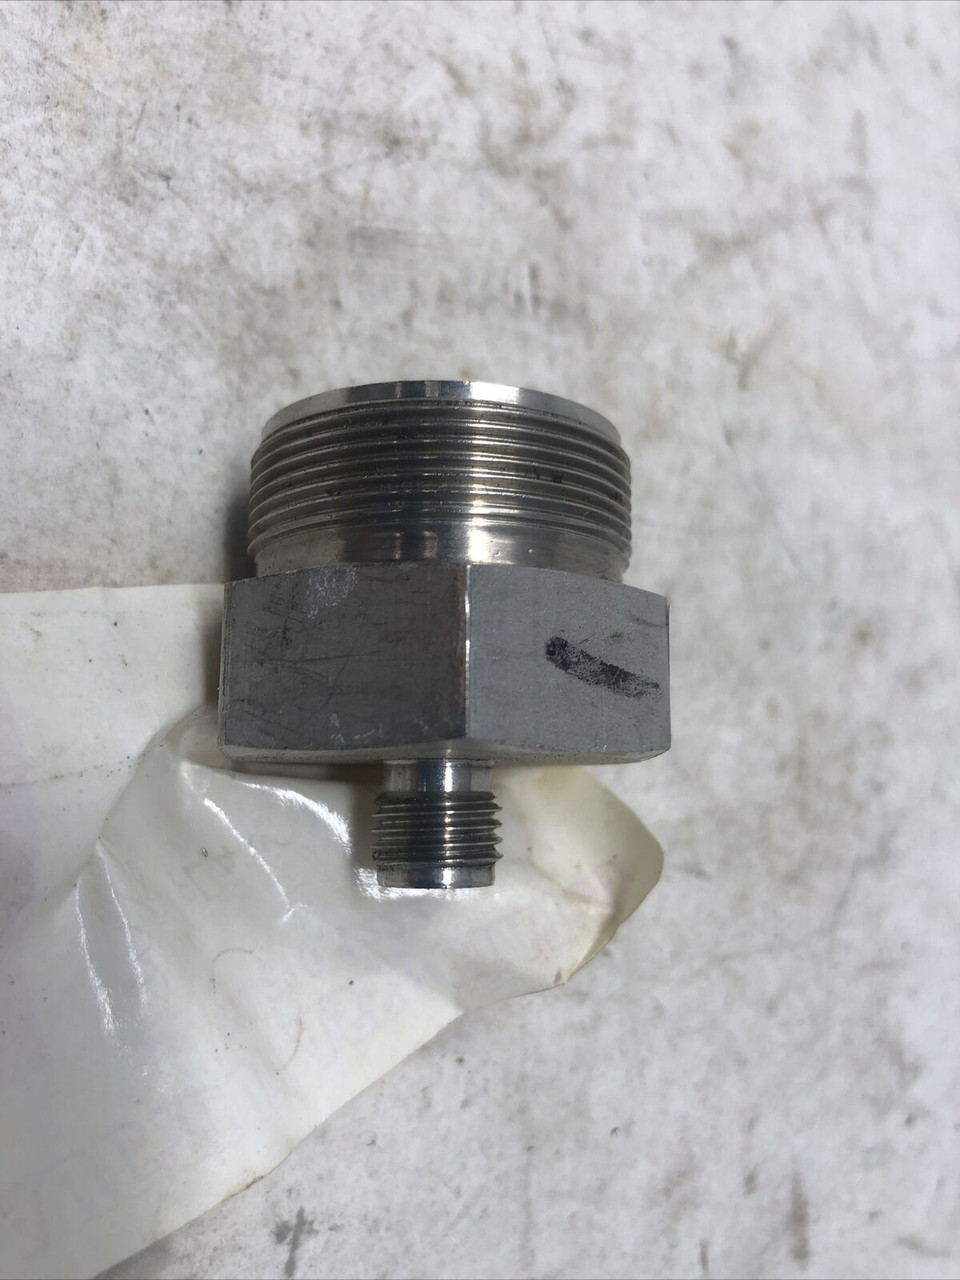 SWAGELOK FITTING 3/8" TO 1 1/2" CONNECTOR 316SS - PREOWNED